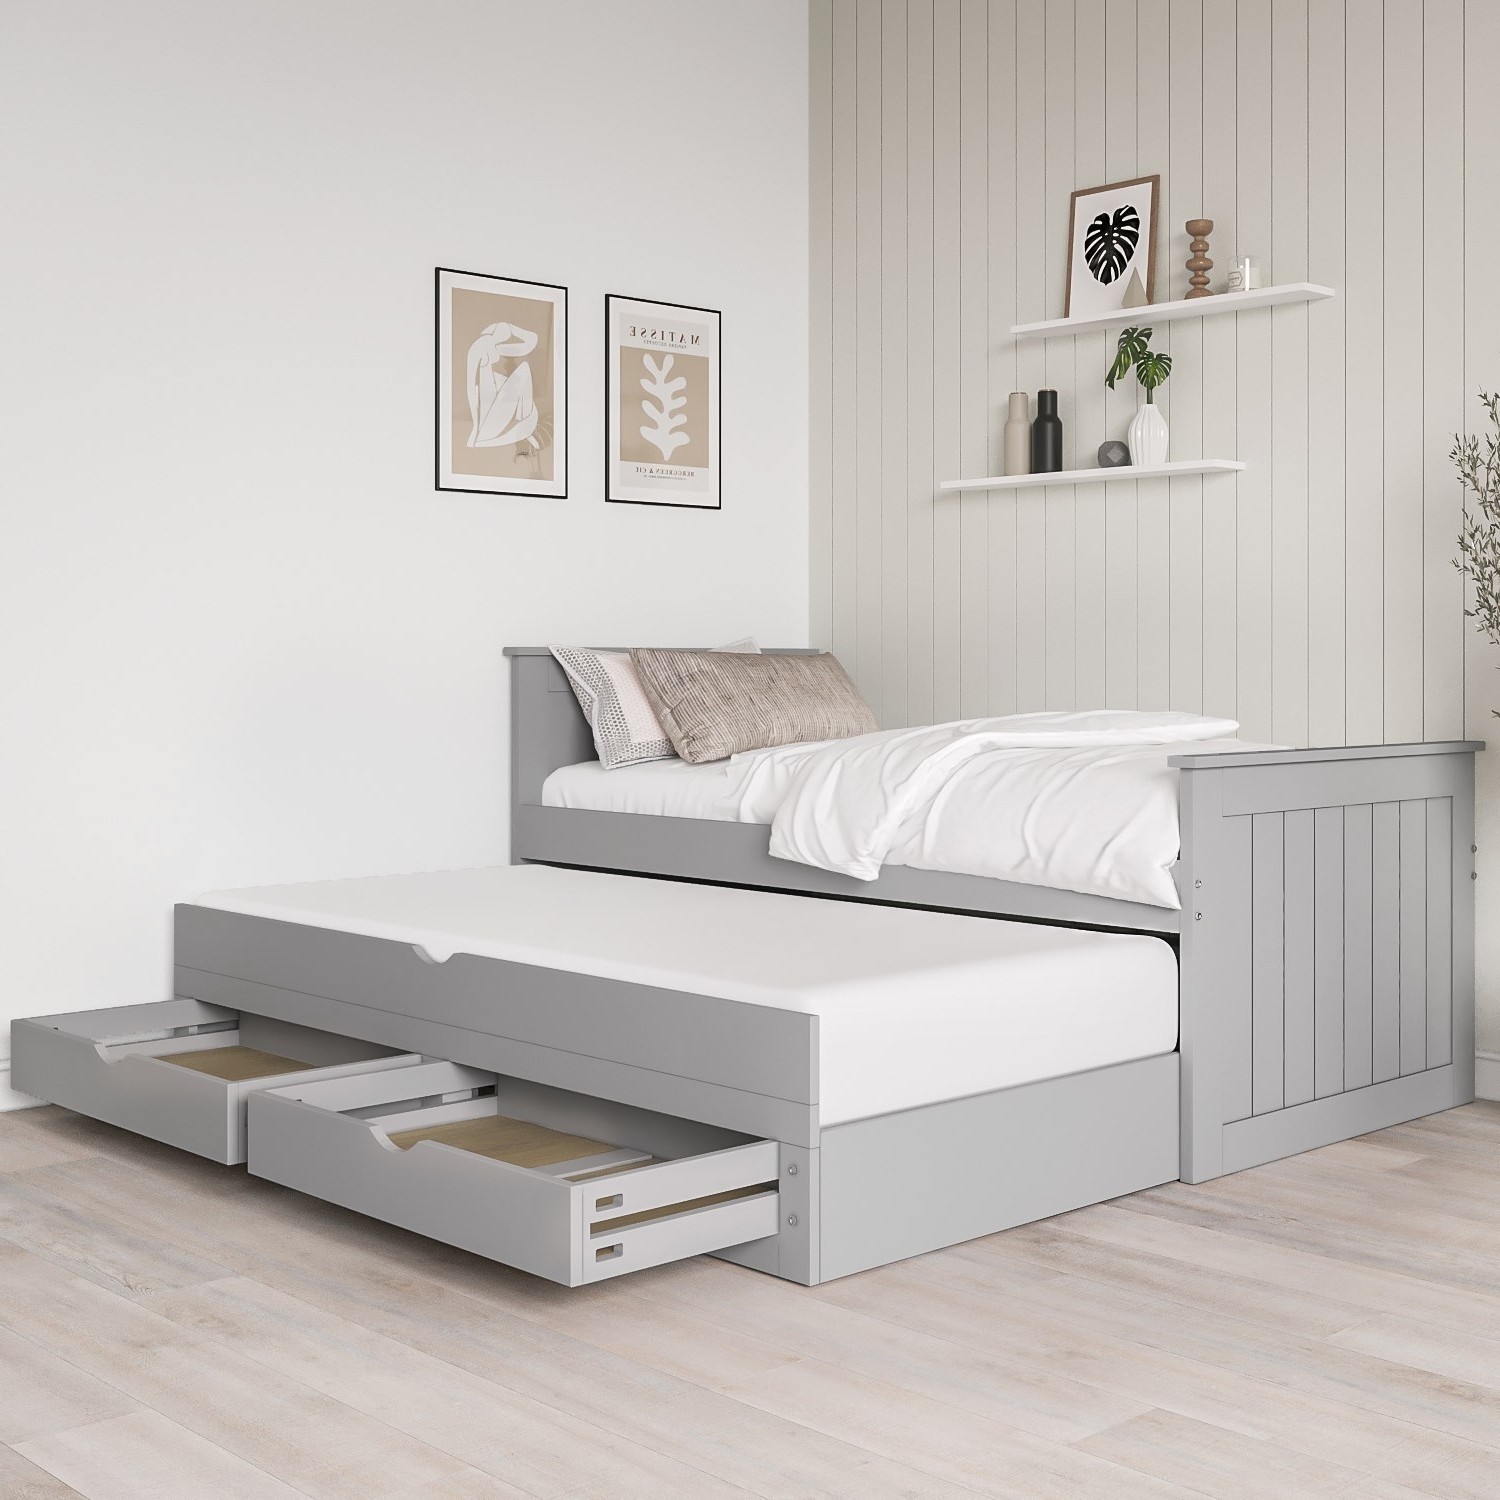 Read more about Single grey wooden trundle bed with storage sander